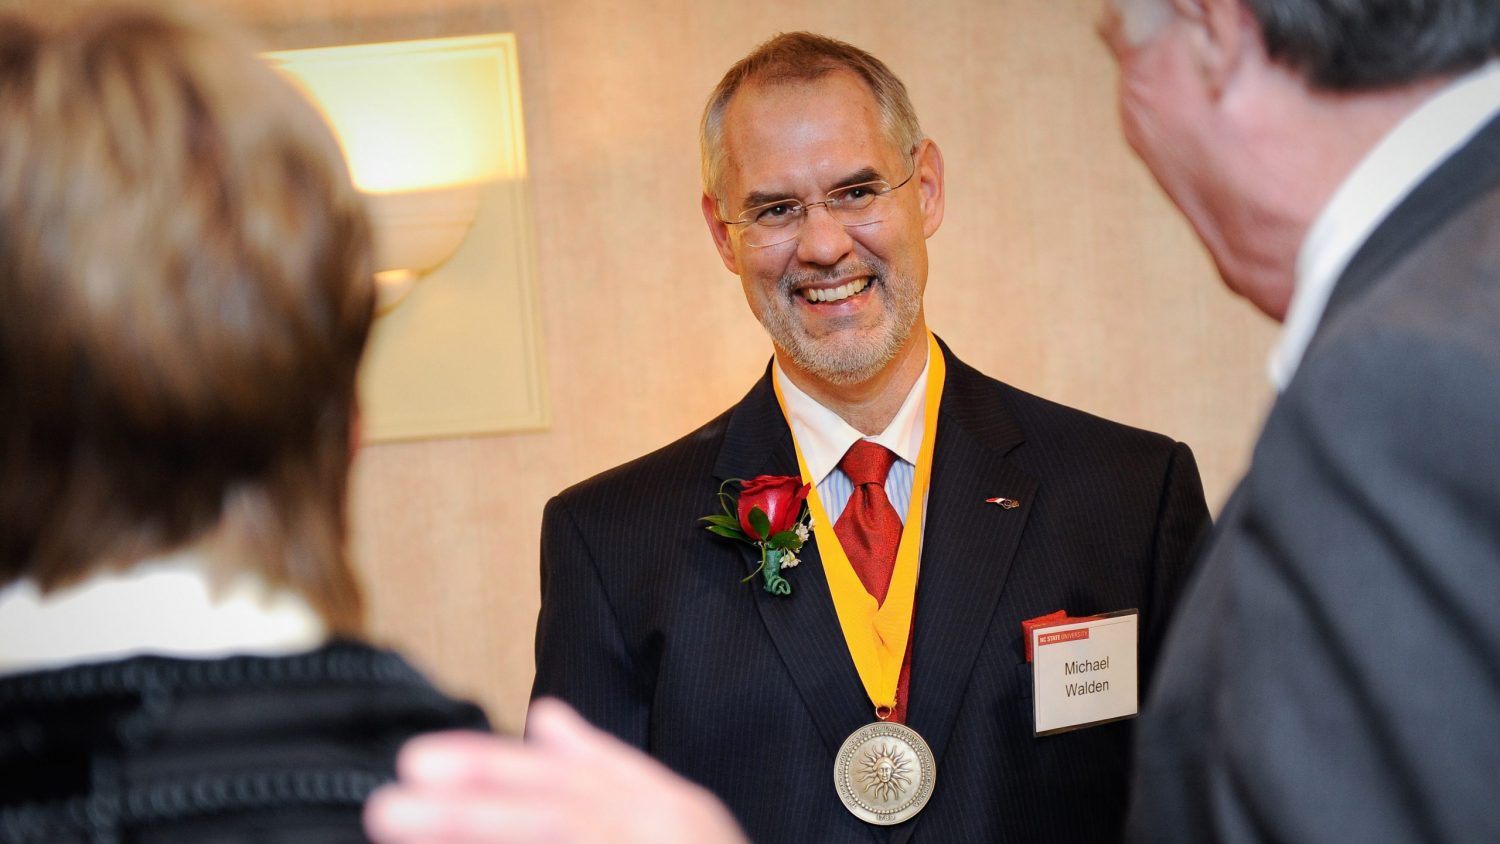 Mike Walden after being presented with the Holladay Medal, NC State’s highest faculty honor